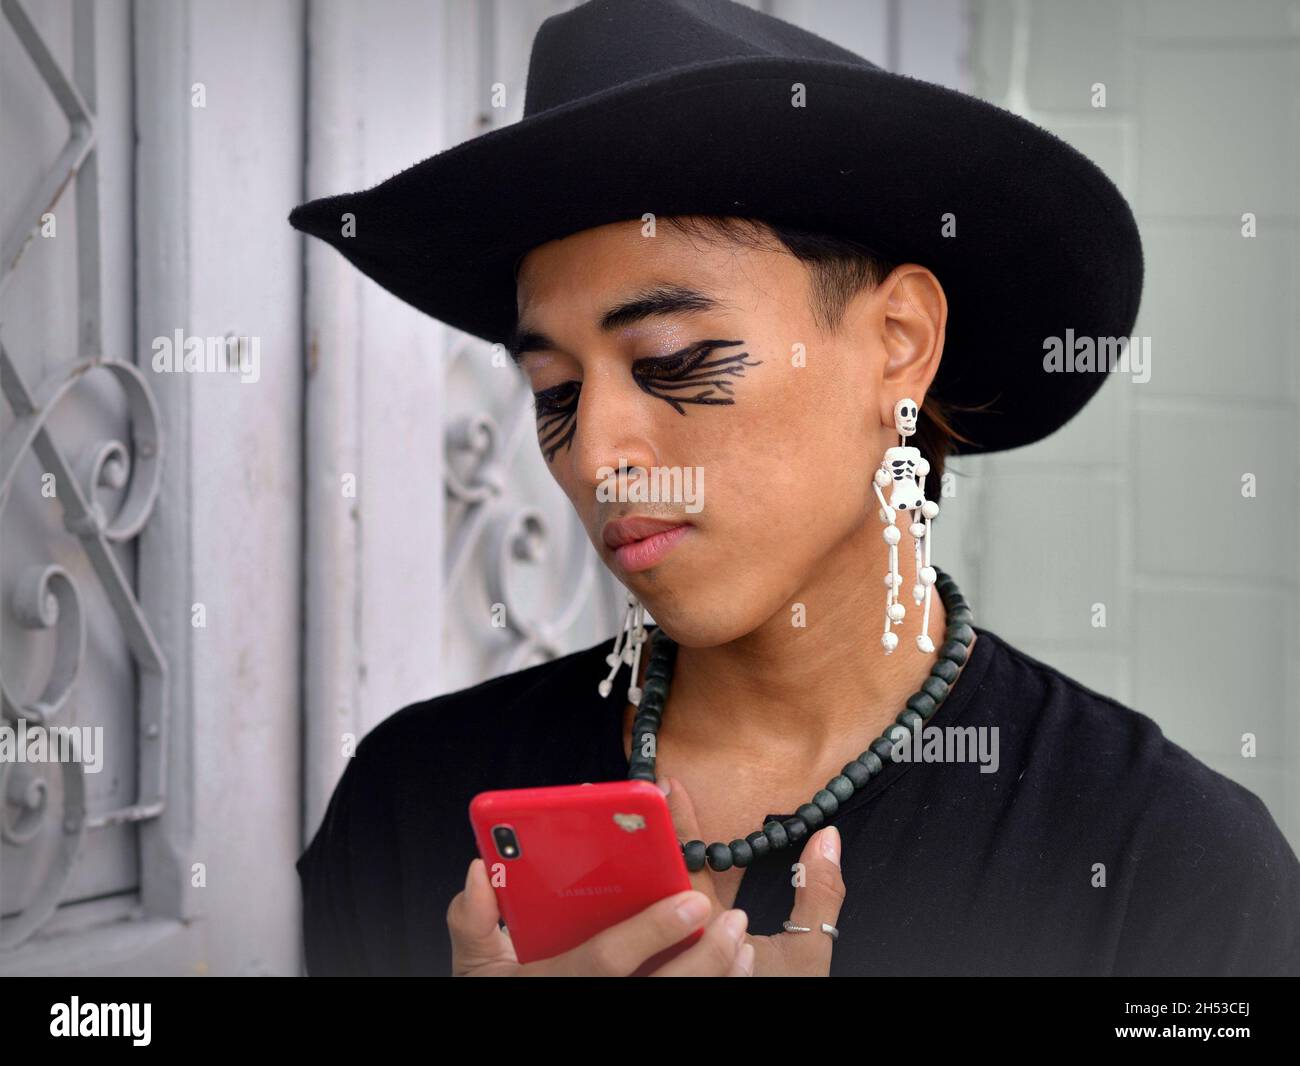 Handsome young nonbinary Mexican Latino with Day of the Dead skeleton earrings wears a black hat and looks at his red smart phone. Stock Photo